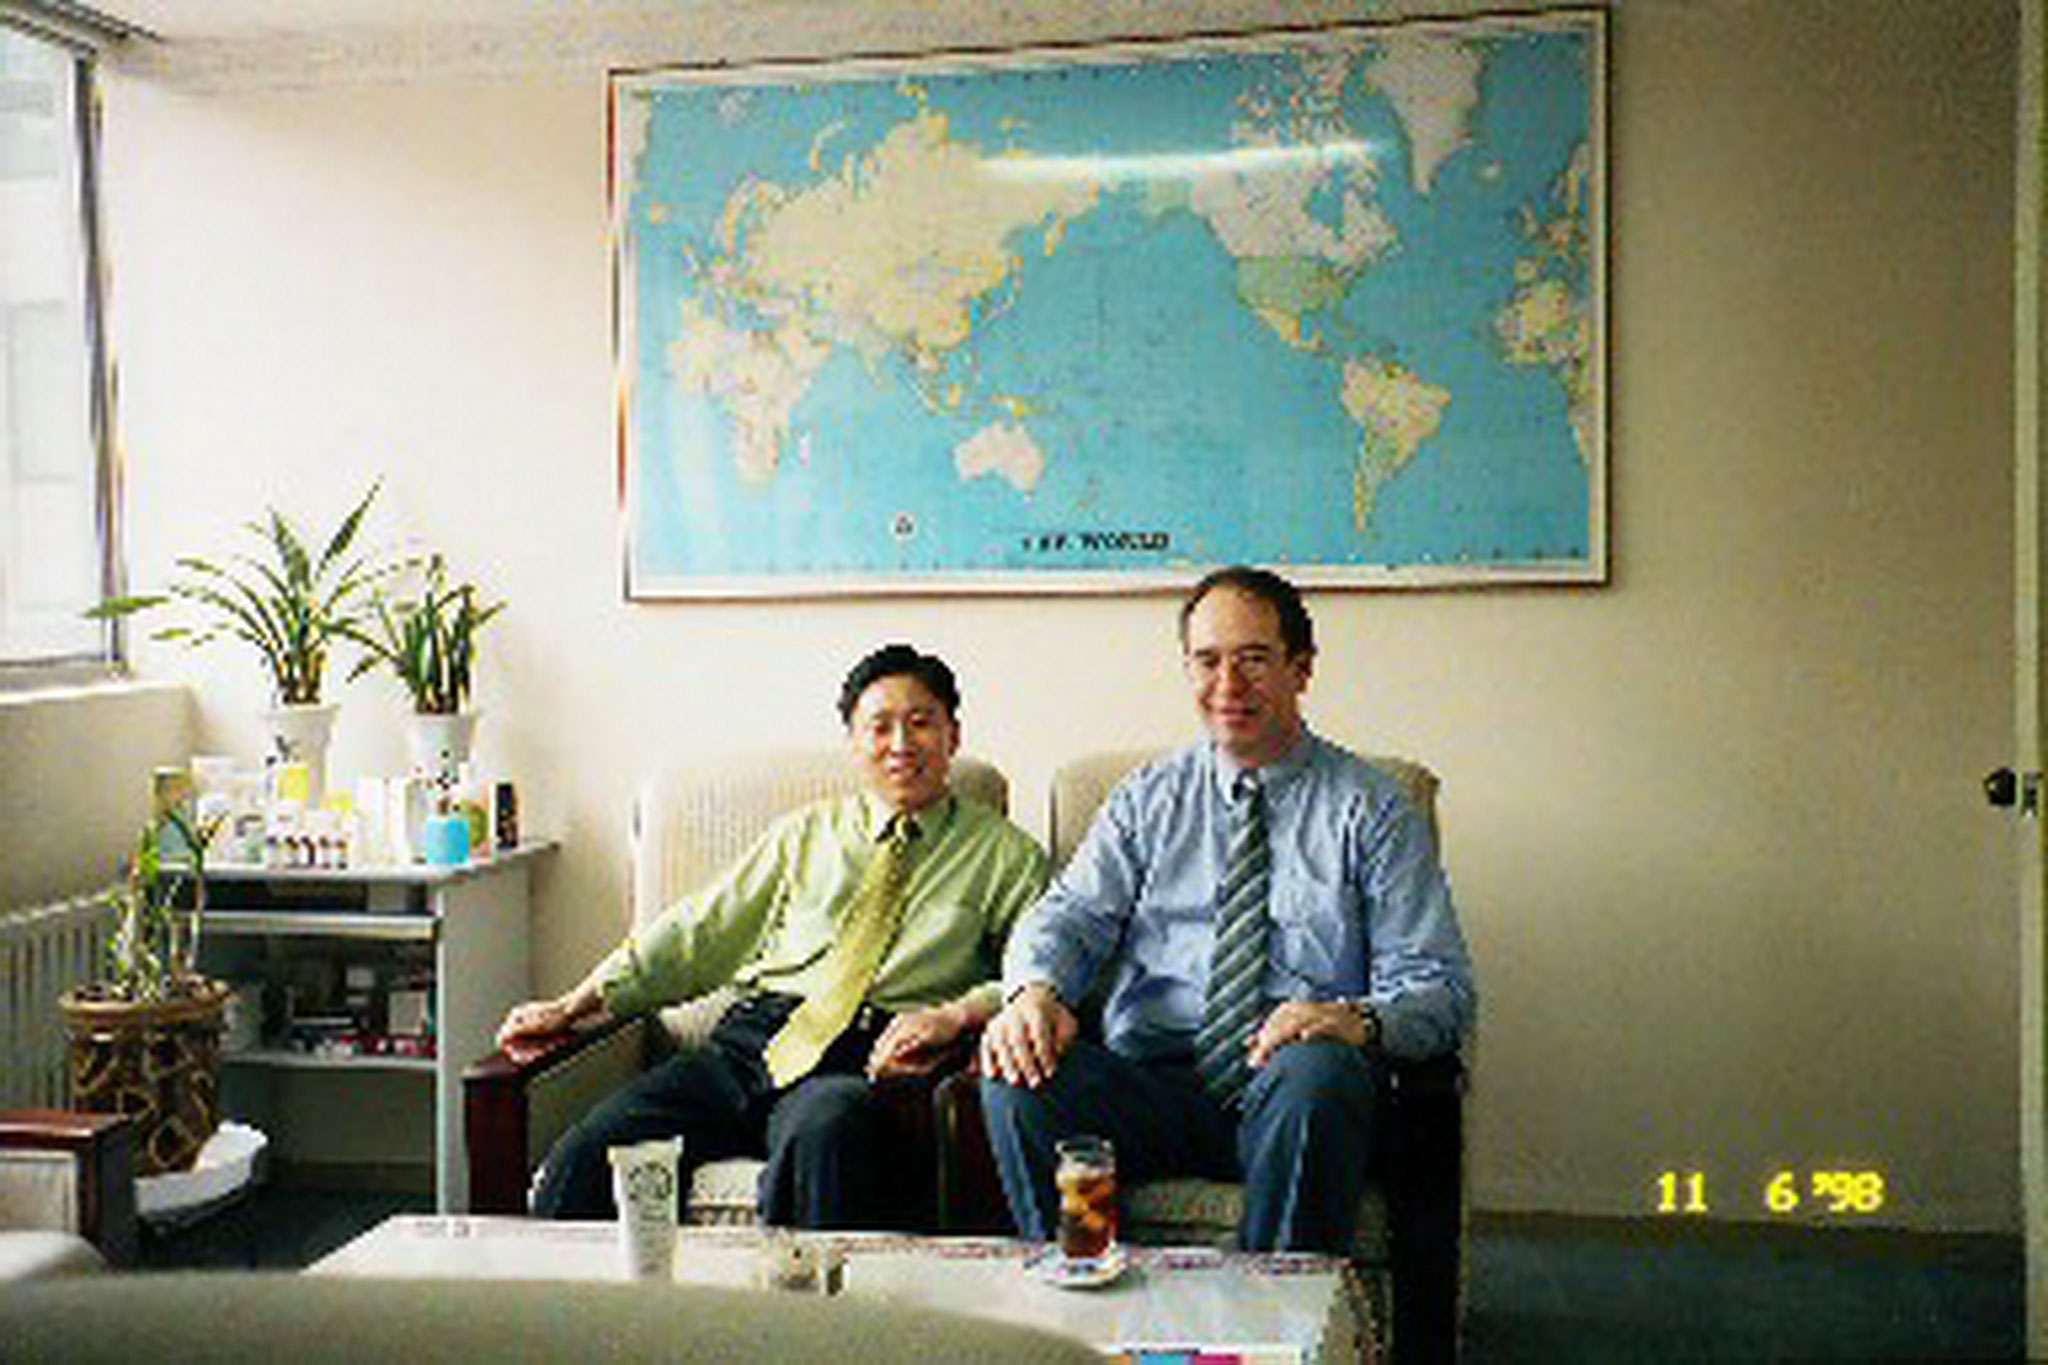 With Mr. Choi in Korea in 1997